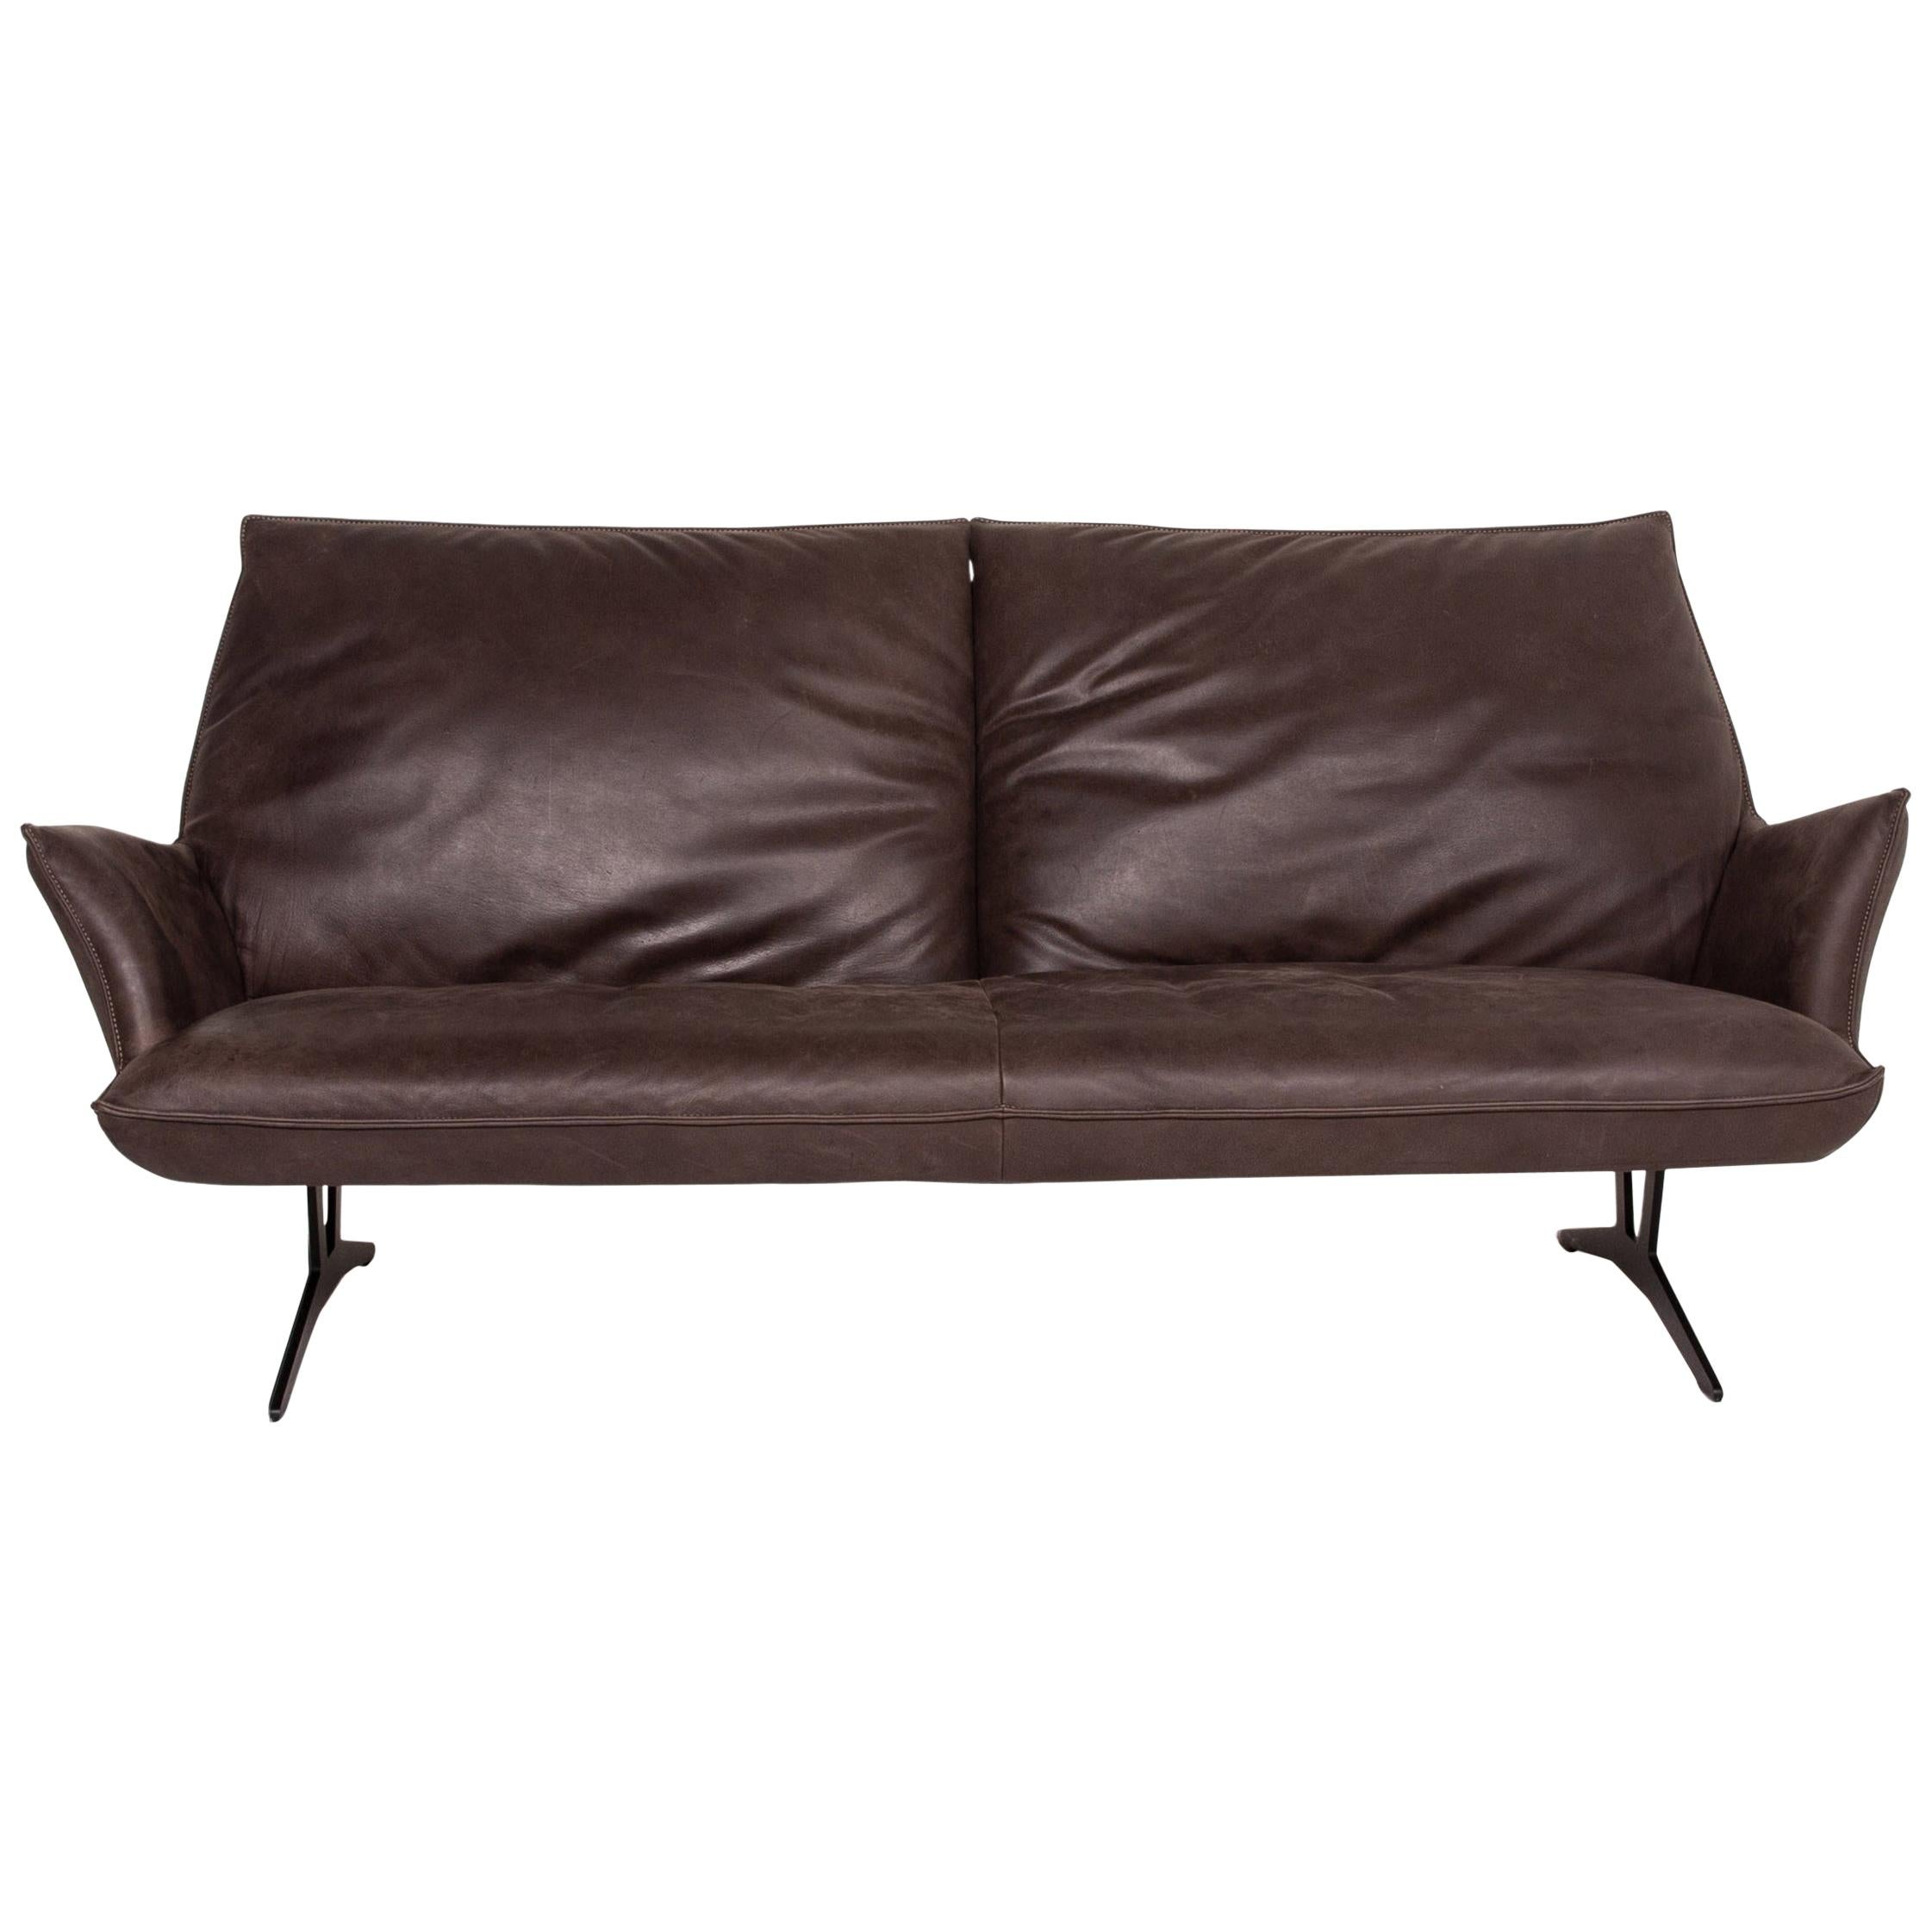 Koinor Leather Sofa Brown Dark Brown Three-Seat Function Couch